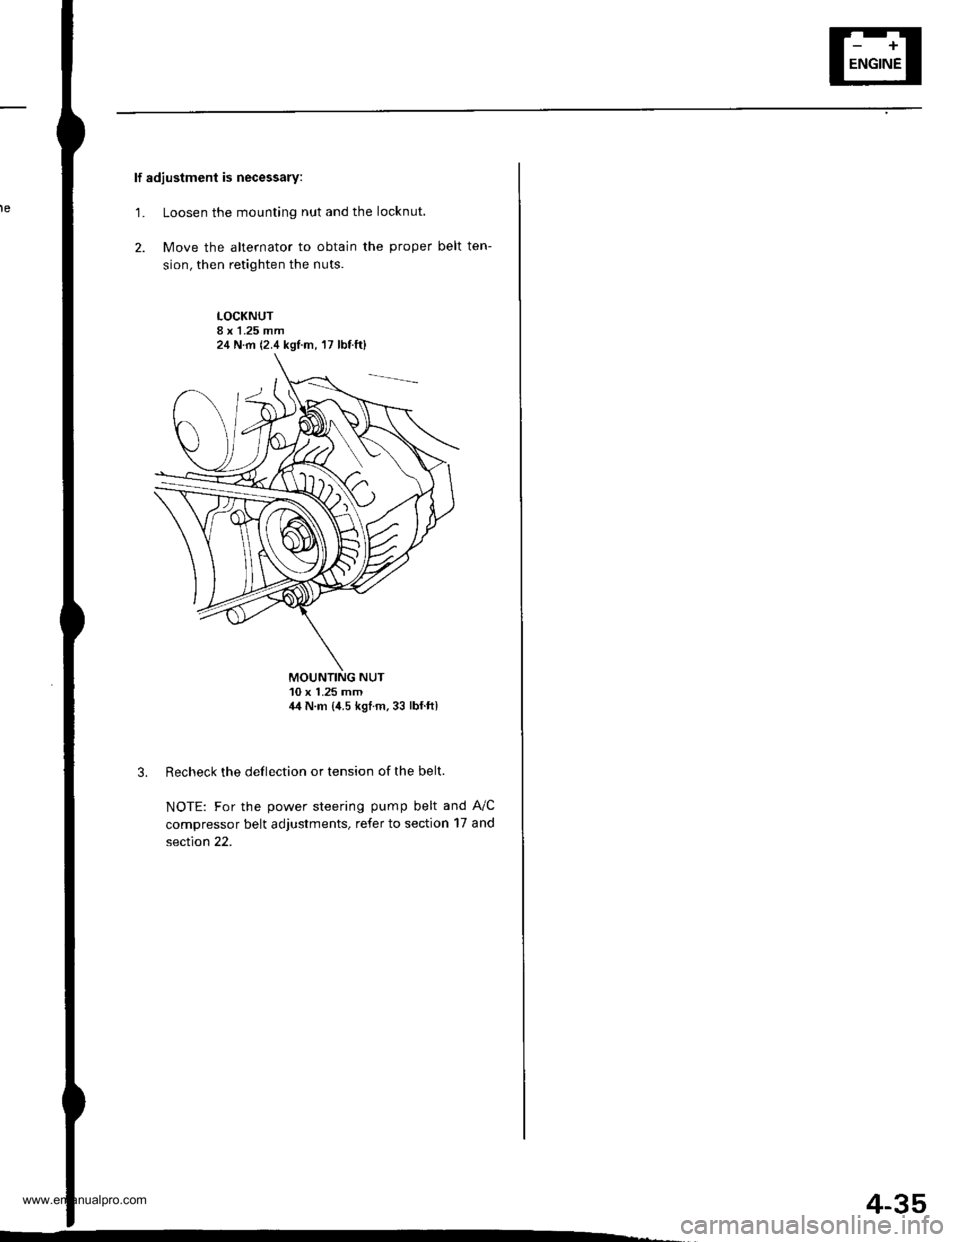 HONDA CR-V 1997 RD1-RD3 / 1.G Workshop Manual 
lf adjustment is necessary:
1. Loosen the mounting nut and the locknut.
2. Move the alternator to obtain the proper belt ten-
sion, then retighten the nuts.
LOCKNUT8 x 1.25 mm
MOUNTING NUT10 x 1.25 m